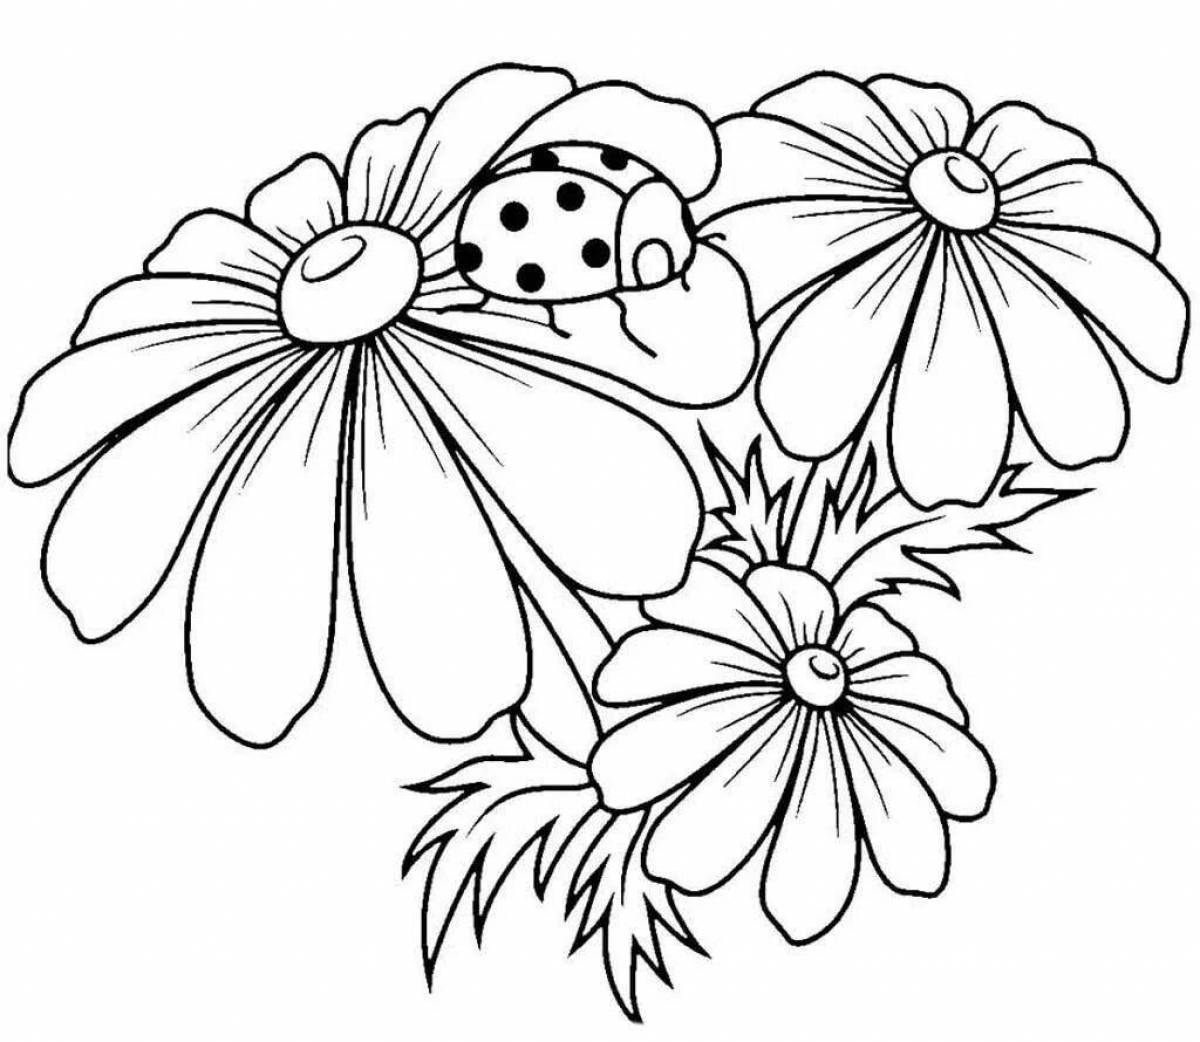 Coloring book beautiful bouquet of daisies